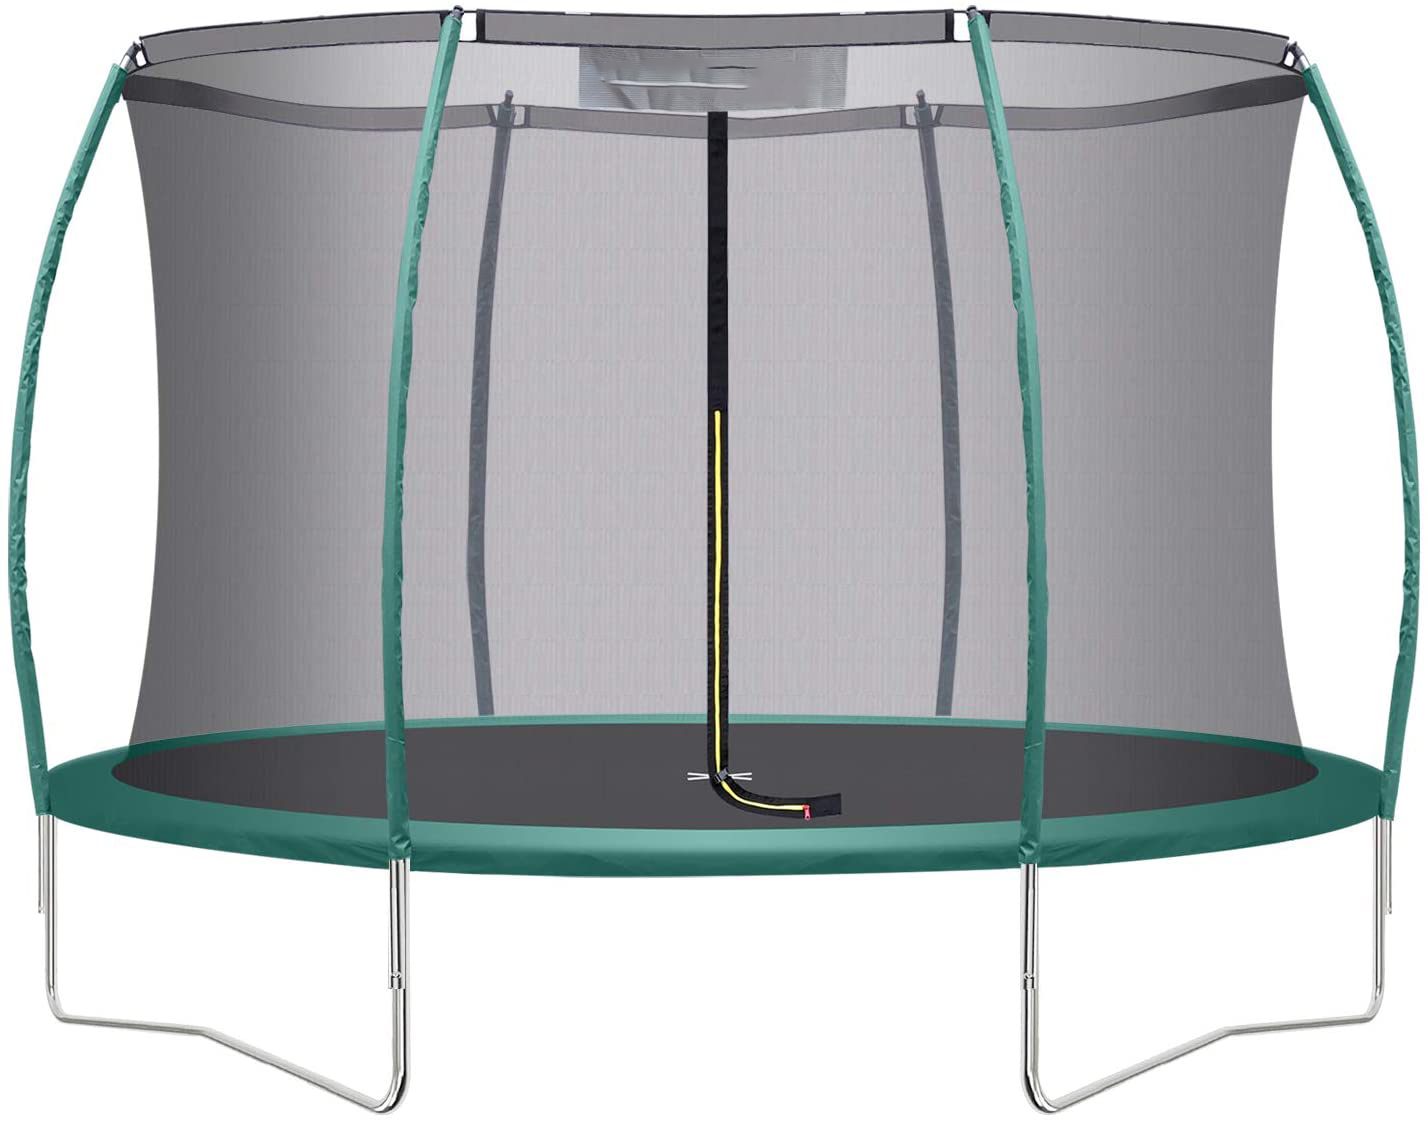 Garden anti-fall trampoline with safety fence children's trampoline safety exercise